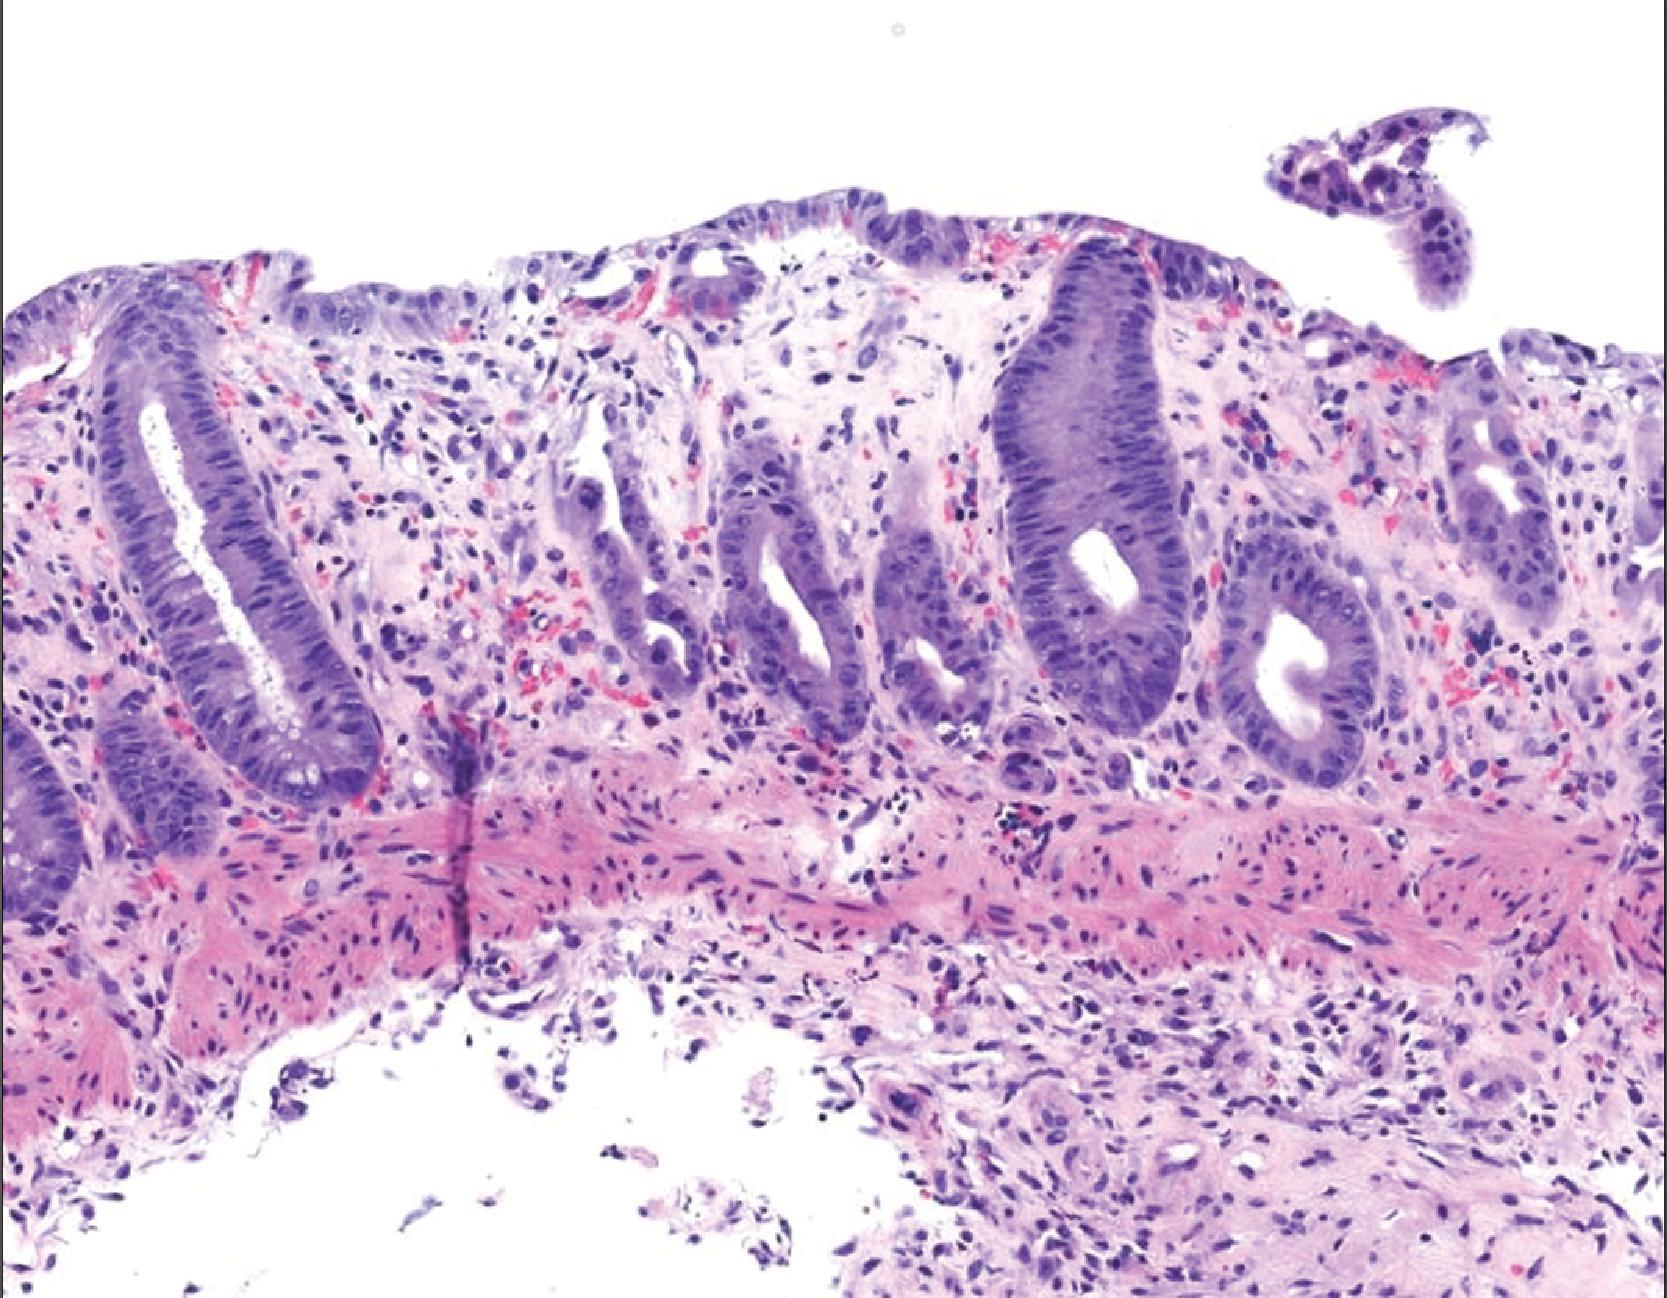 FIG. 6, Ischemic colitis, H&E, 100×. This image shows characteristic features of ischemic colitis, including superficial epithelial injury, crypts with atypia including nuclear hyperchromasia, and hyalinized lamina propria. The crypts appear closer together due to lamina propria collapse.